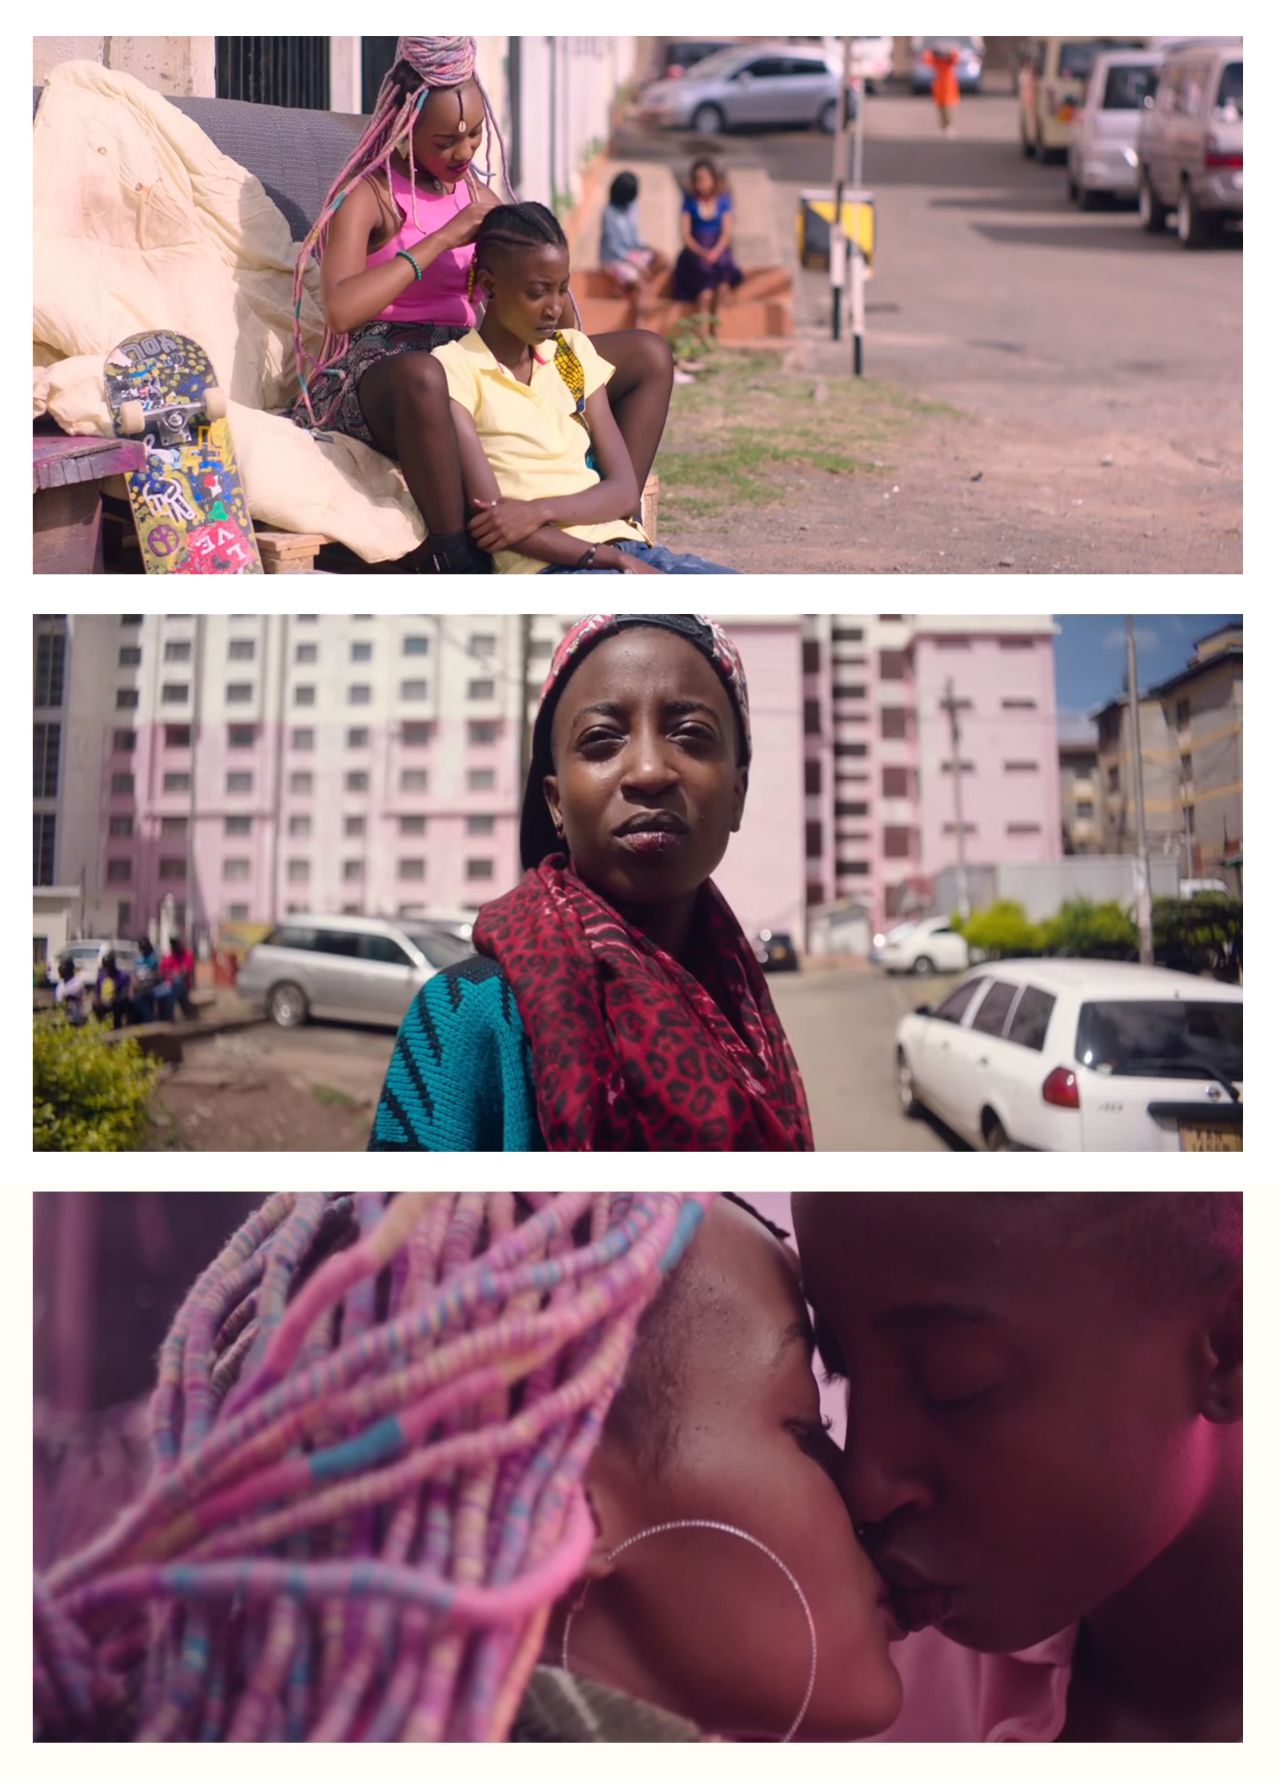 Film stills from "Rafiki" show the director's use of pink hues.